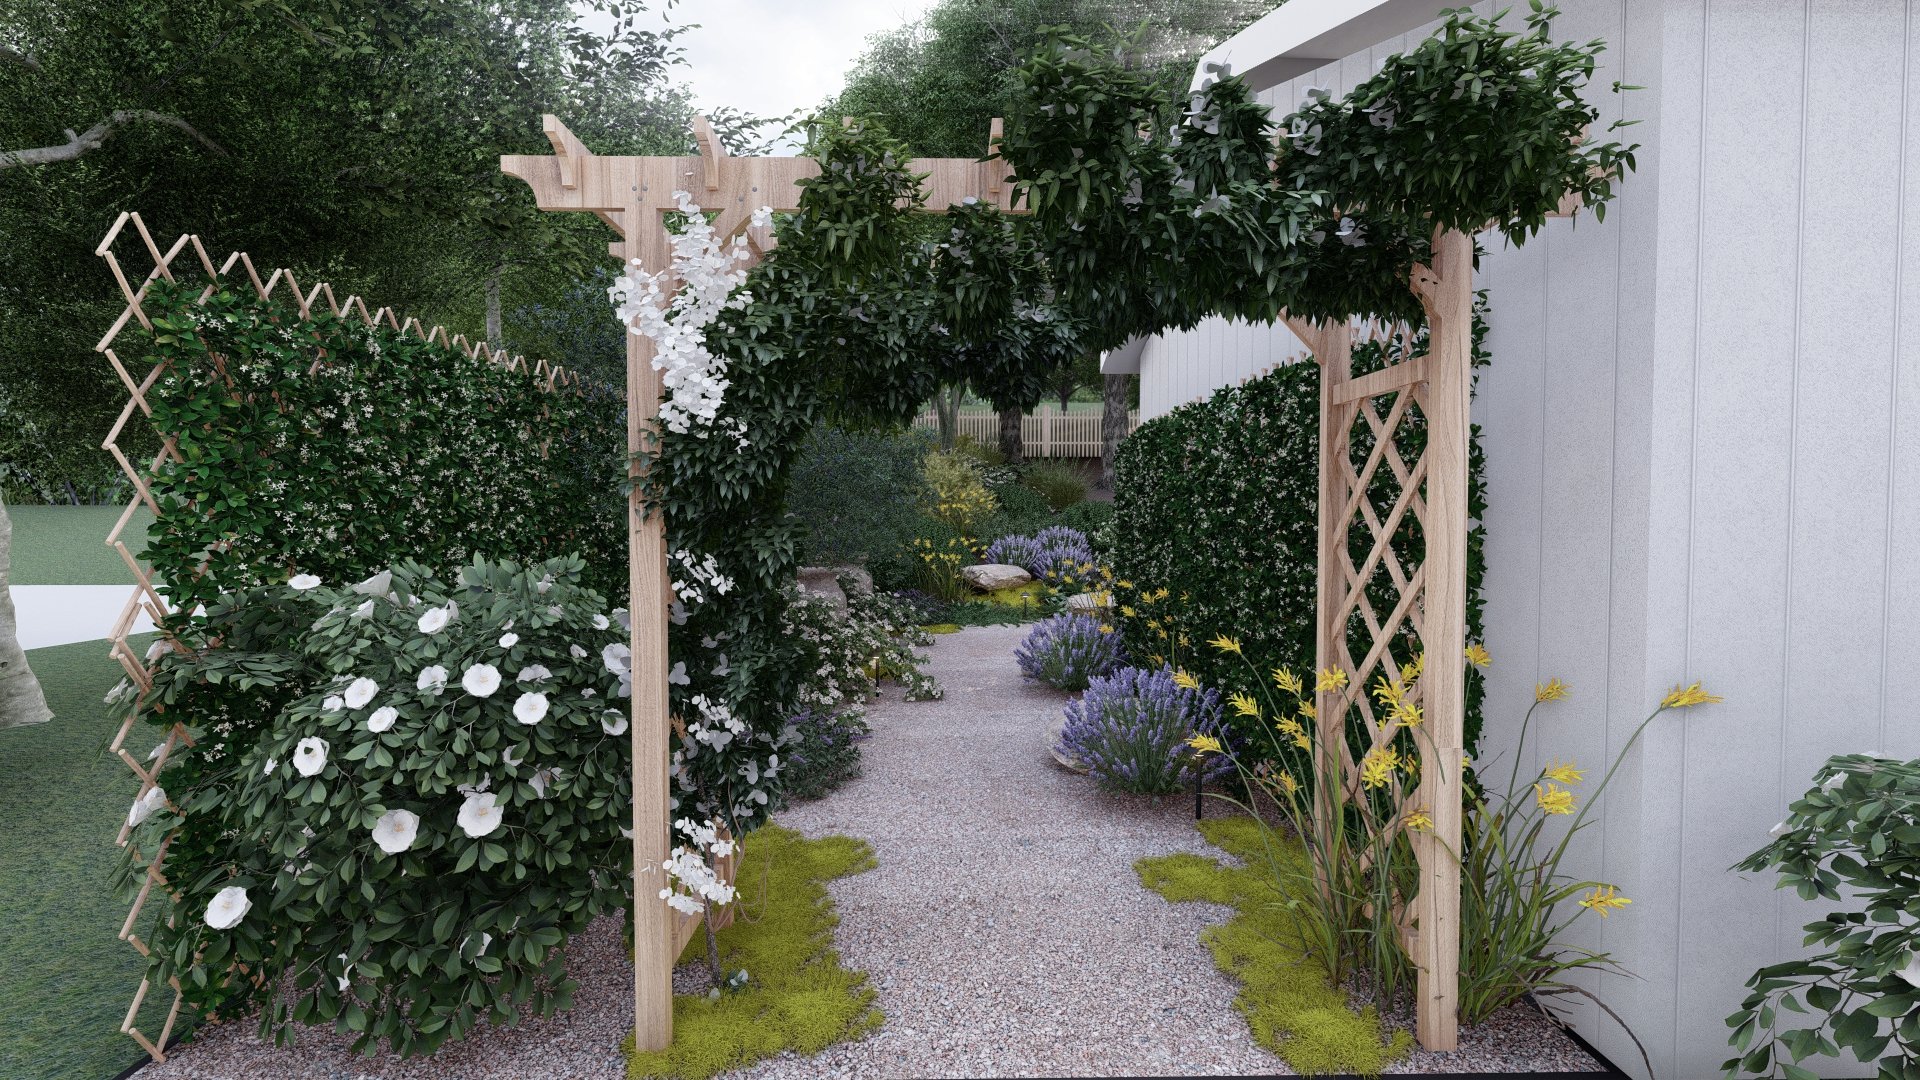 Gravel-floored cottage garden with pergola and ornamental plants.